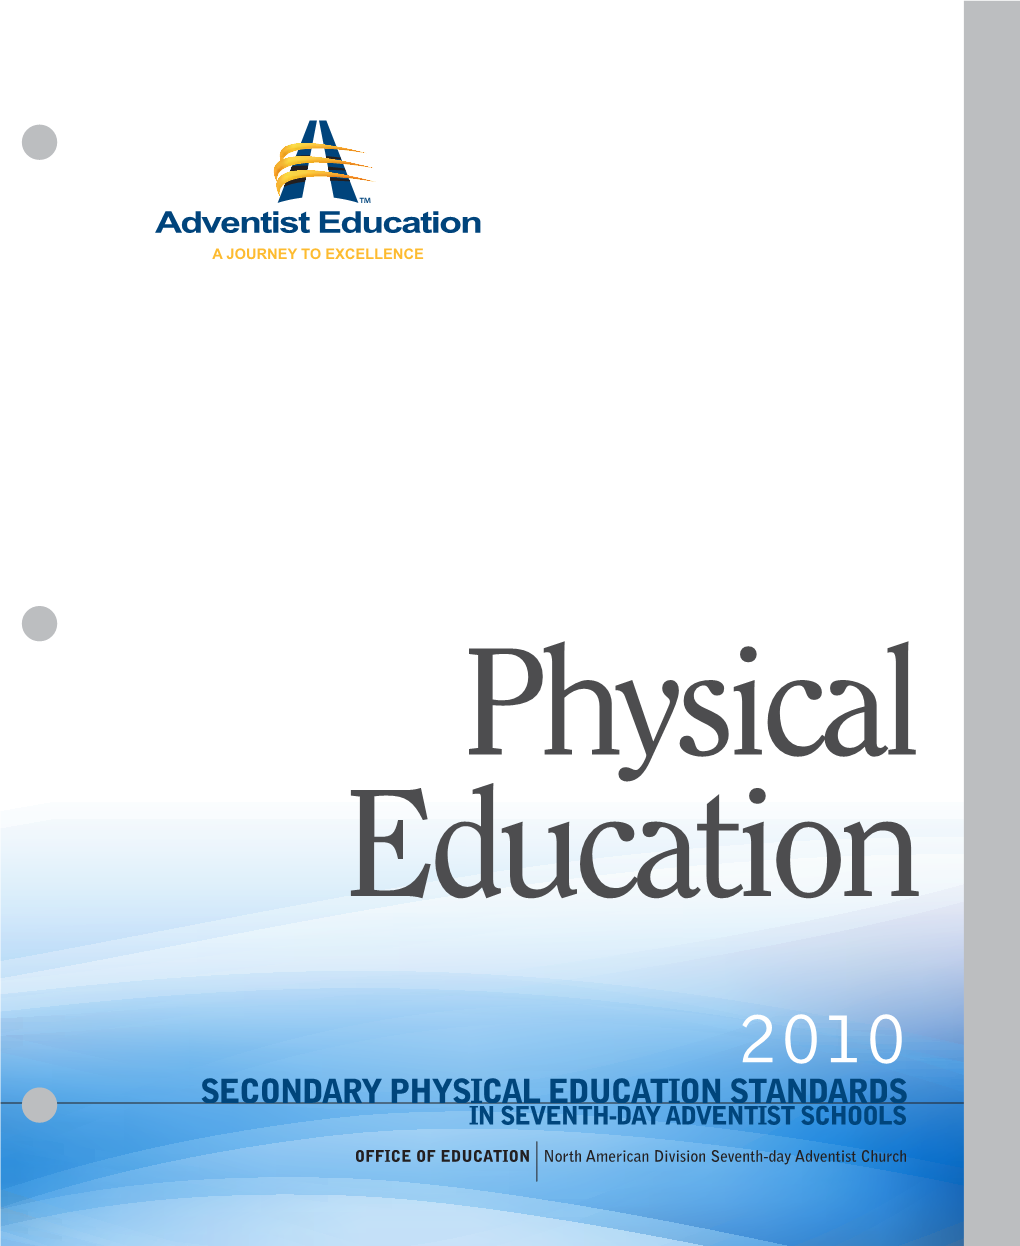 Secondary Physical Education Standards in Seventh-Day Adventist Schools